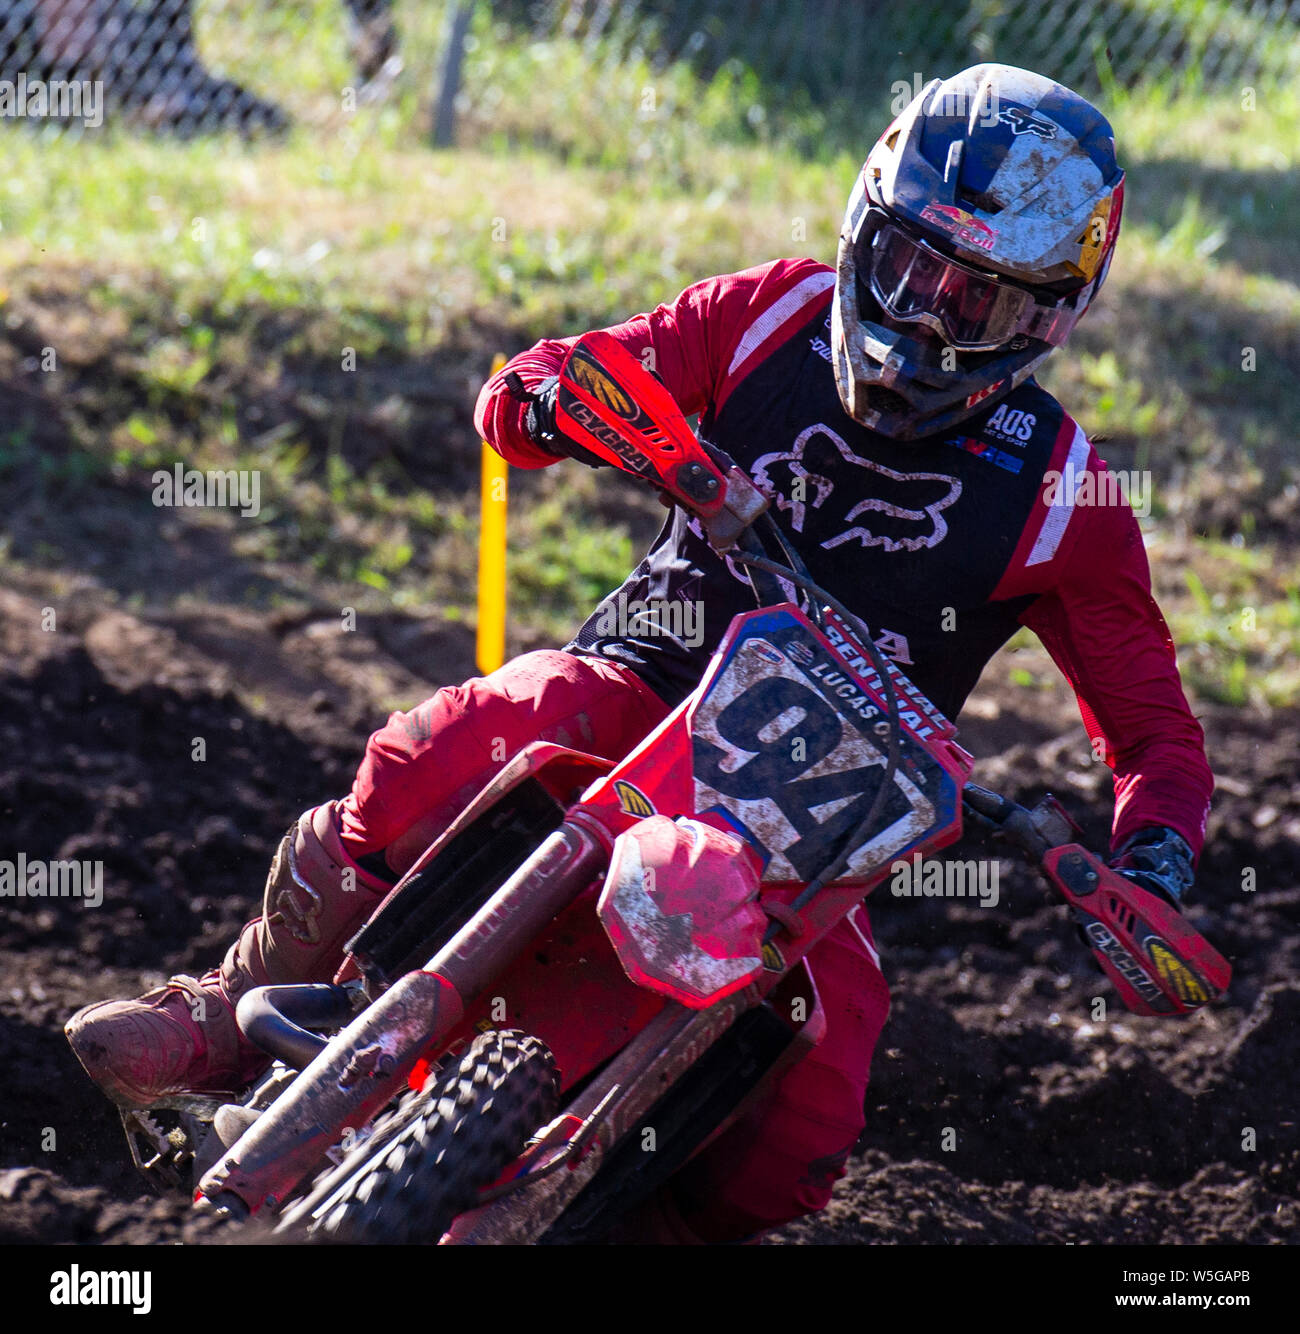 Washougal, WA USA. 27th July, 2019. # 94 Ken Roczen coming out of turn 31 during the Lucas Oil Pro Motocross Washougal National 450 class championship at Washougal MX park Washougal, WA Thurman James/CSM/Alamy Live News Stock Photo